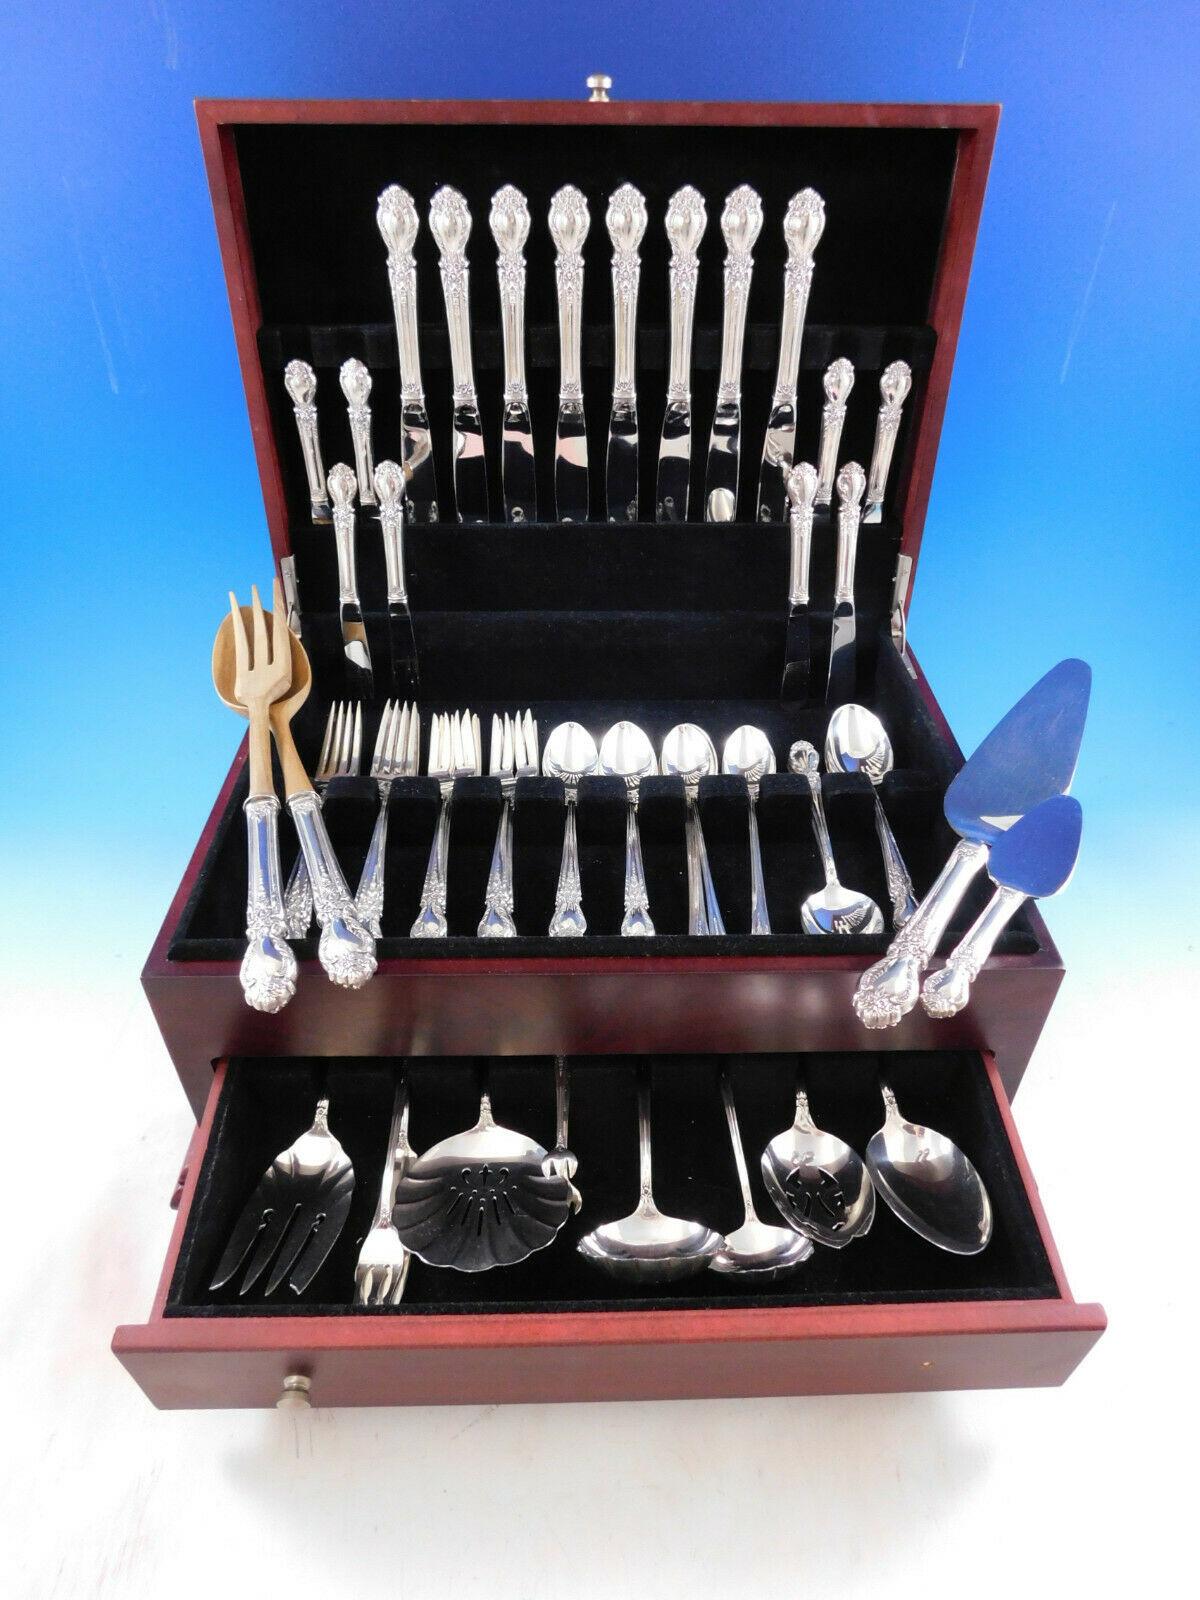 Brocade by International sterling silver flatware set - 69 pieces. This set includes:
8 knives, 9 1/4